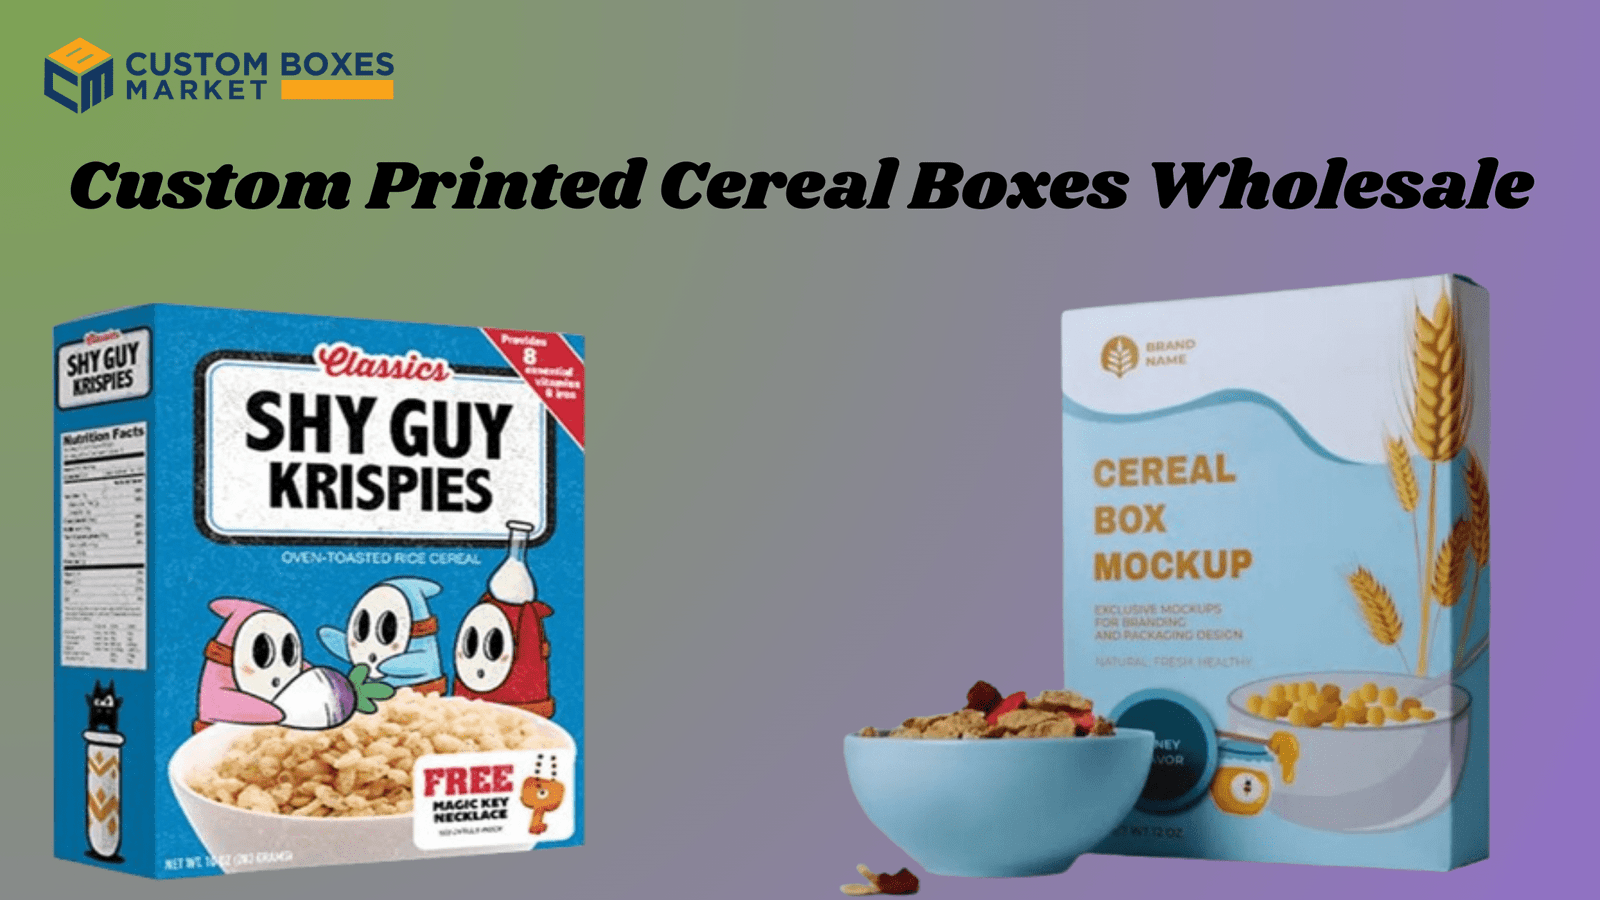 Innovative Insights into Cereal Boxes Wholesale: World of Custom Packaging